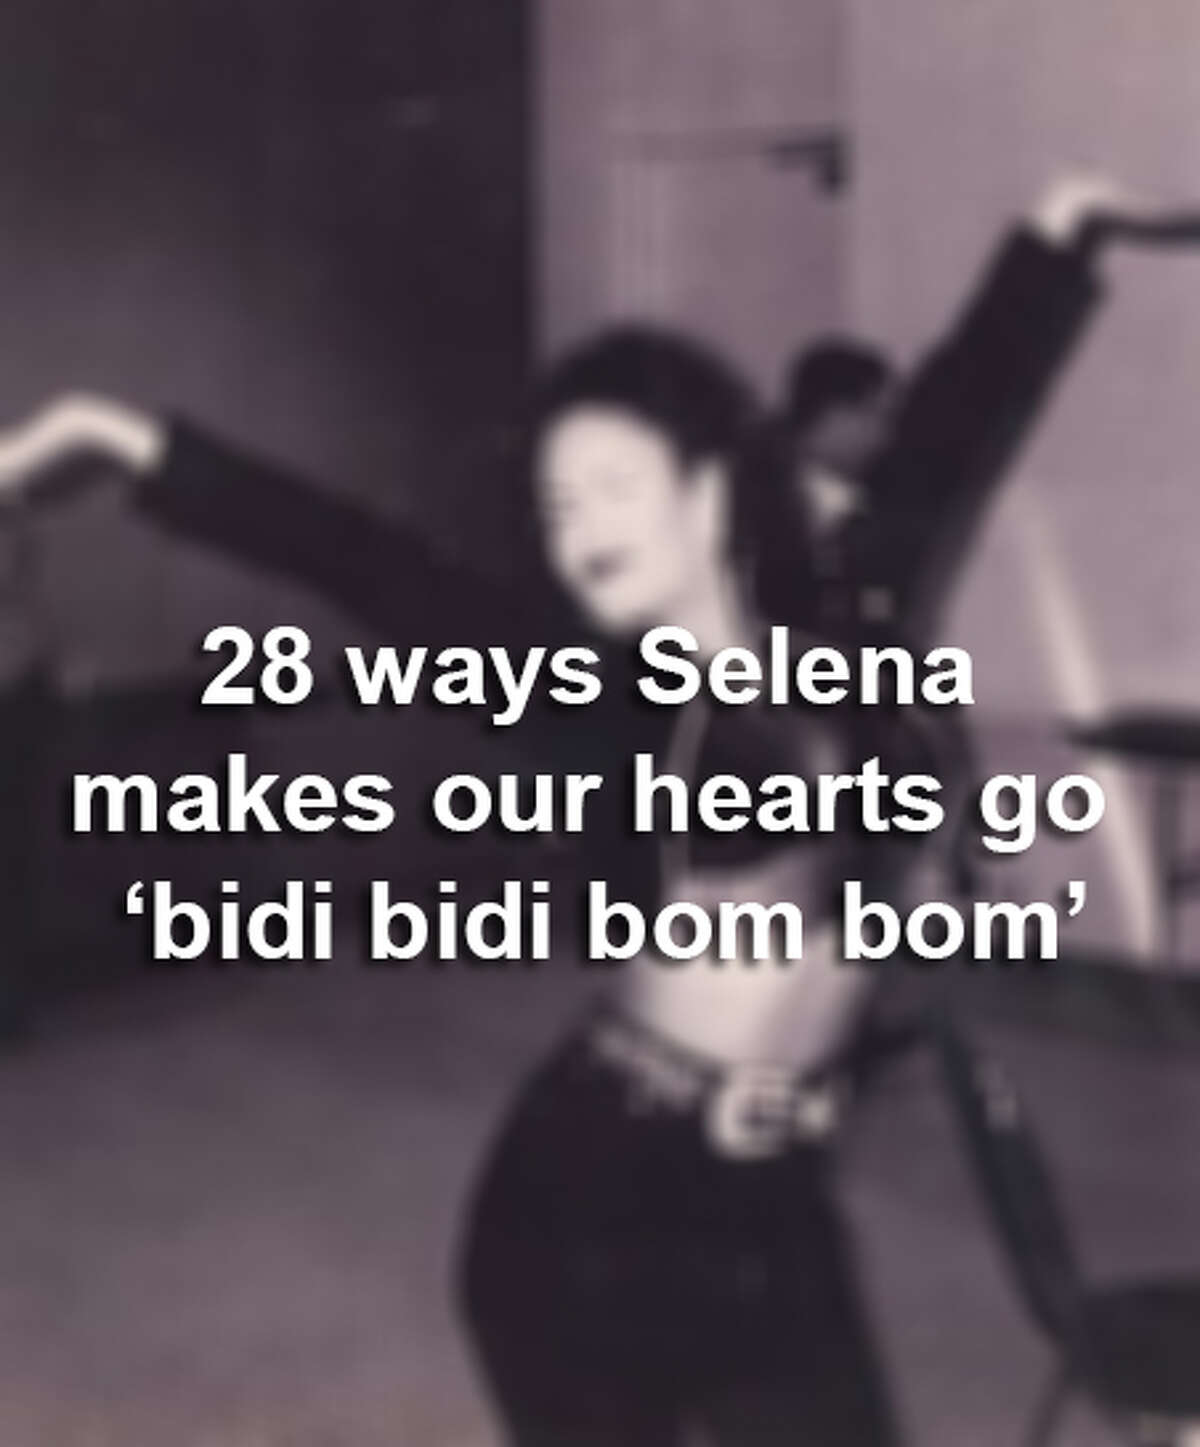 What made Selena the icon that so many find to be alluring, even after death? Of course, her sexy Cumbia footwork, Soprano voice and smile as big as Texas helped her appeal but those are just a few reasons Selena remains a legend that will live forever.